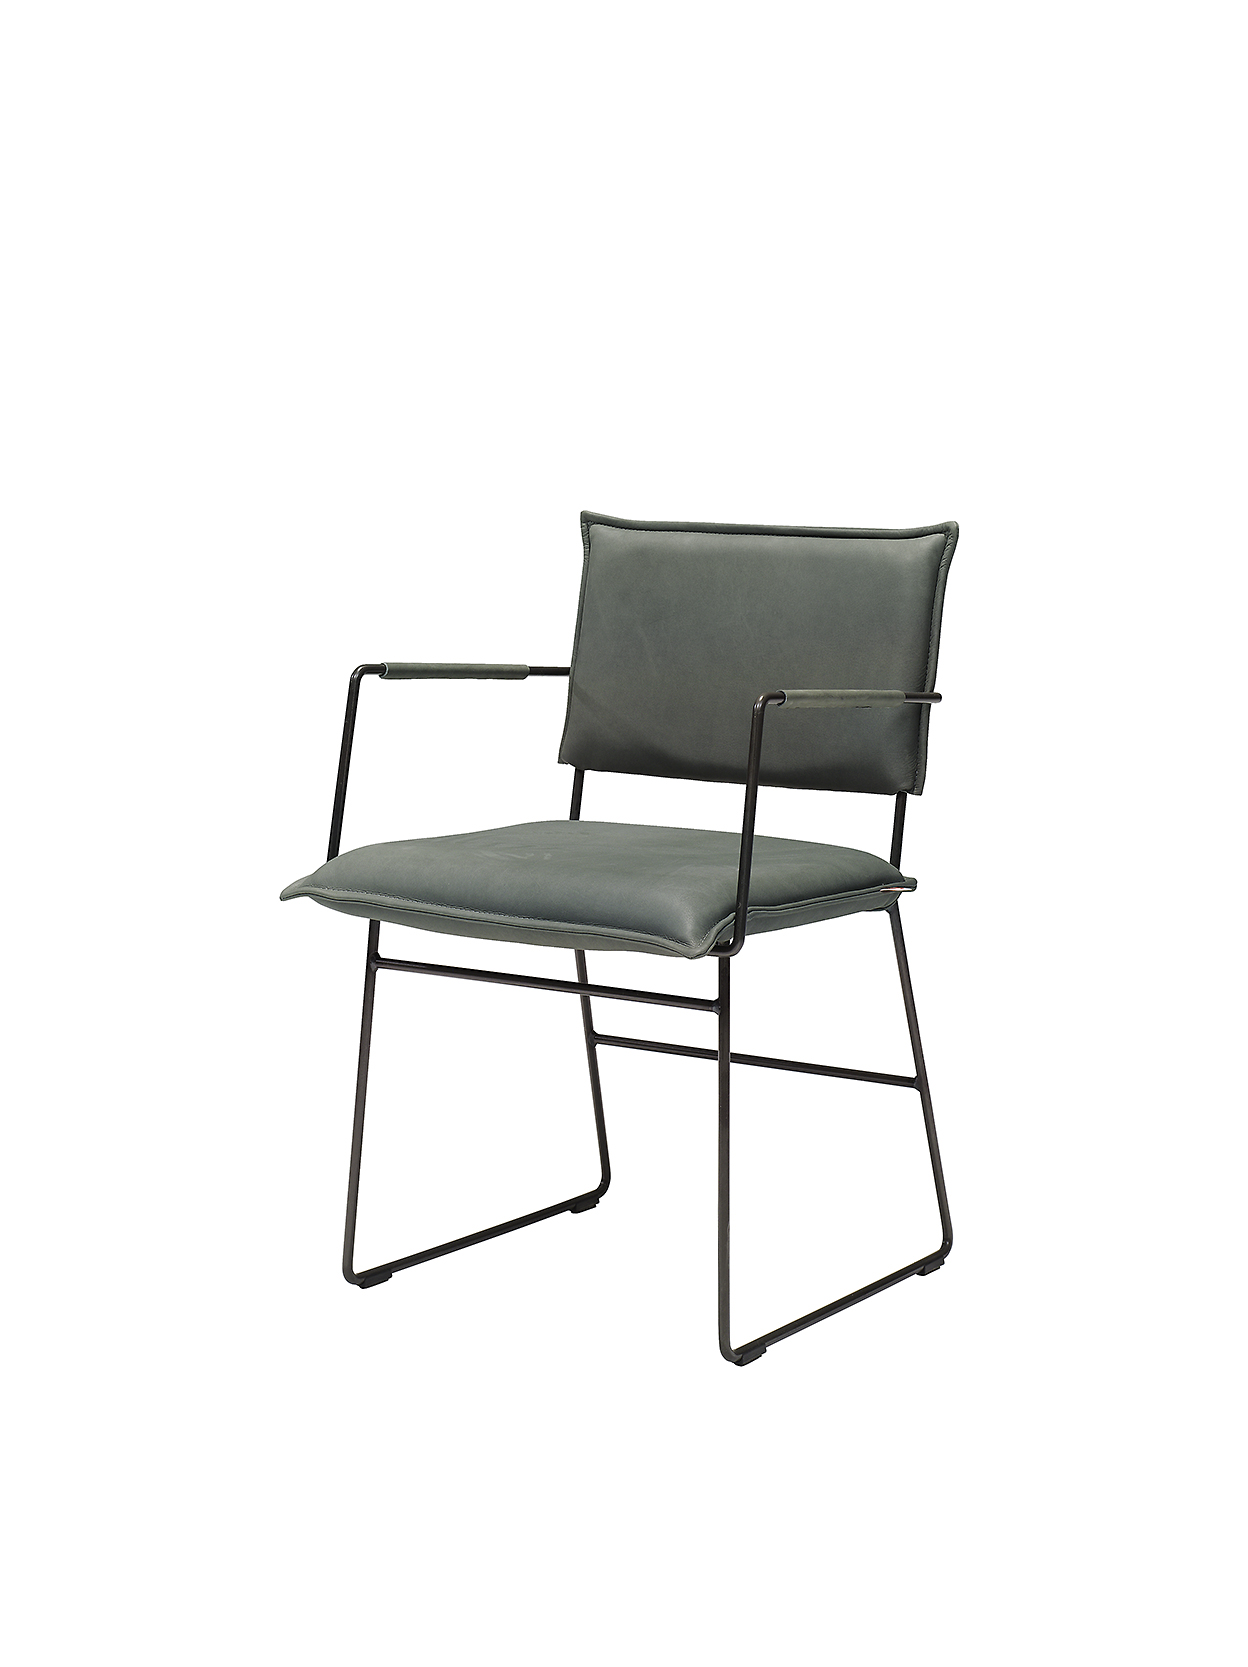 Norman Chair With Arm Sadie Olive Pers LR ZS 8720153744515